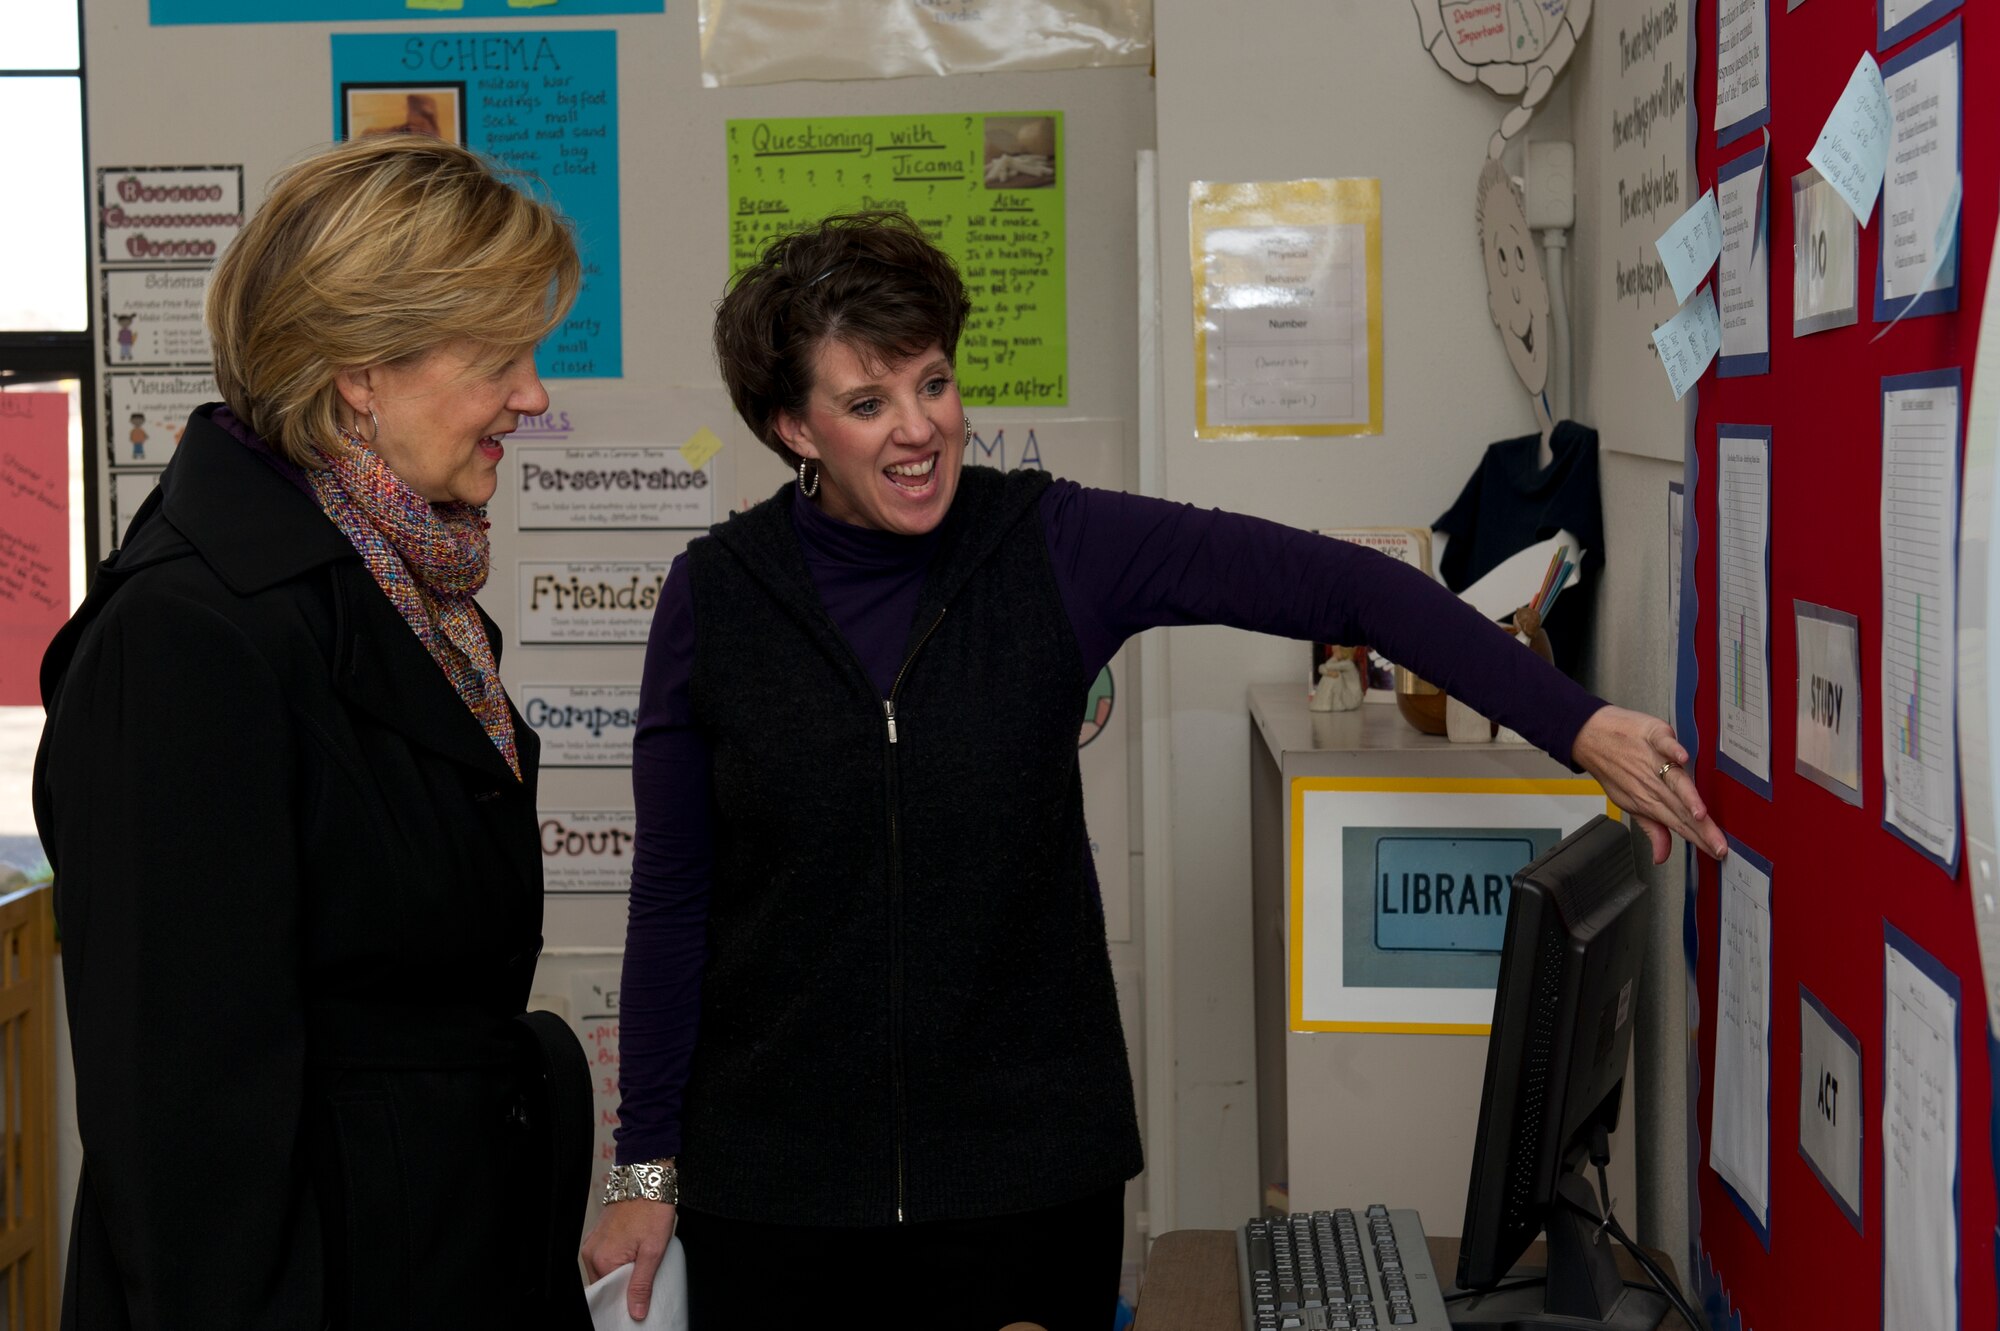 HOLLOMAN AIR FORCE BASE, N.M. – Kim Rand (left), wife of U.S. Air Force Lt. Gen. Robin Rand, 12th Air Force commander, views a sheet with Michelle Korbakes (right), Holloman Elementary School principal, Jan. 18, at Holloman Elementary School. Rand accompanied her husband on his first trip to Holloman and visited with different base agencies. (U.S. Air Force photo by Senior Airman Kasey Close/Released)